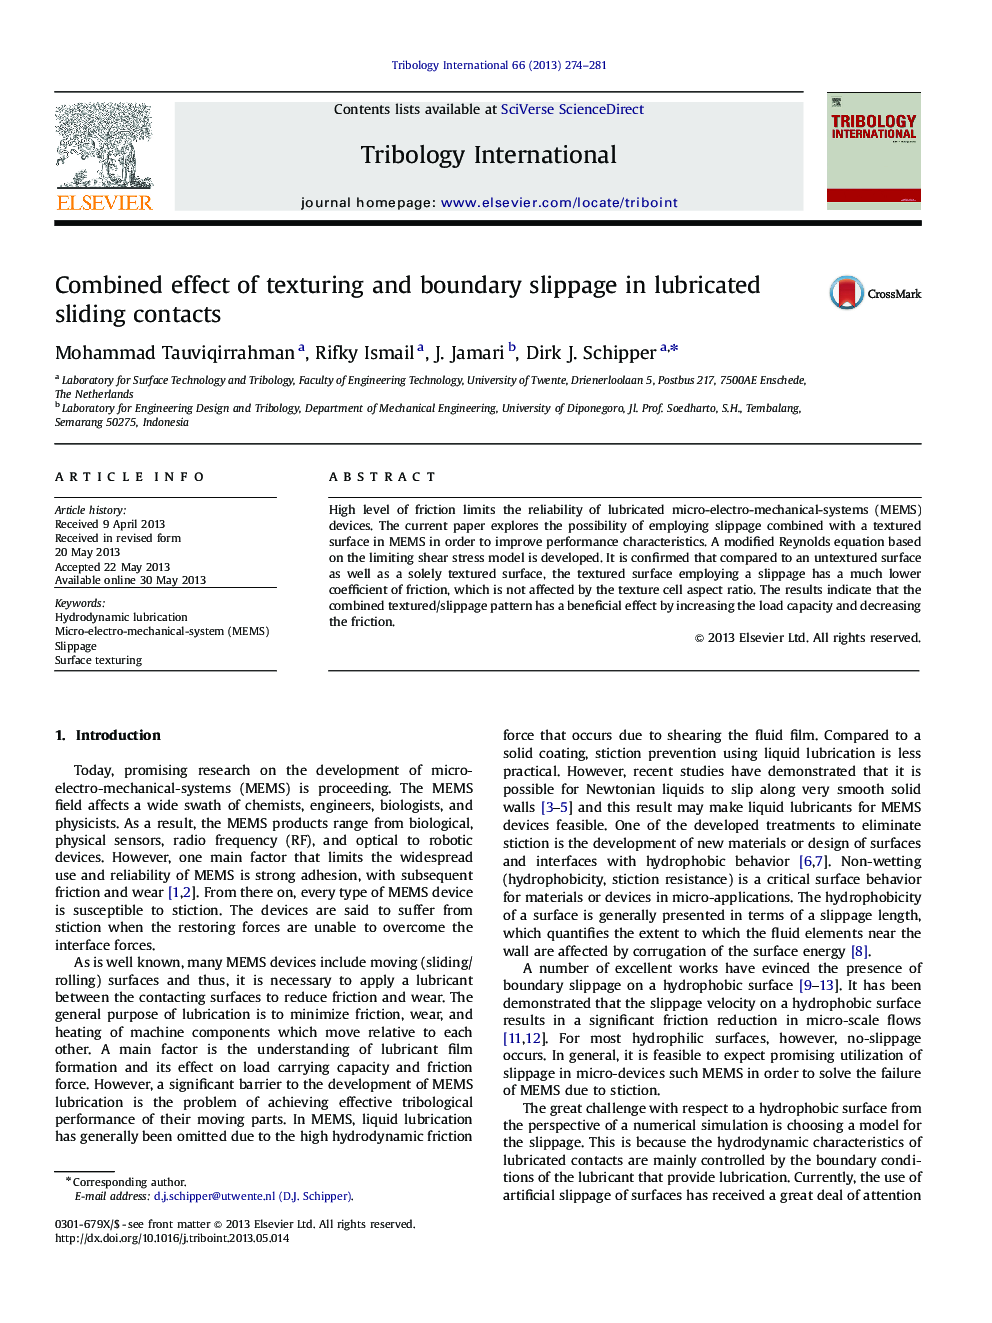 Combined effect of texturing and boundary slippage in lubricated sliding contacts